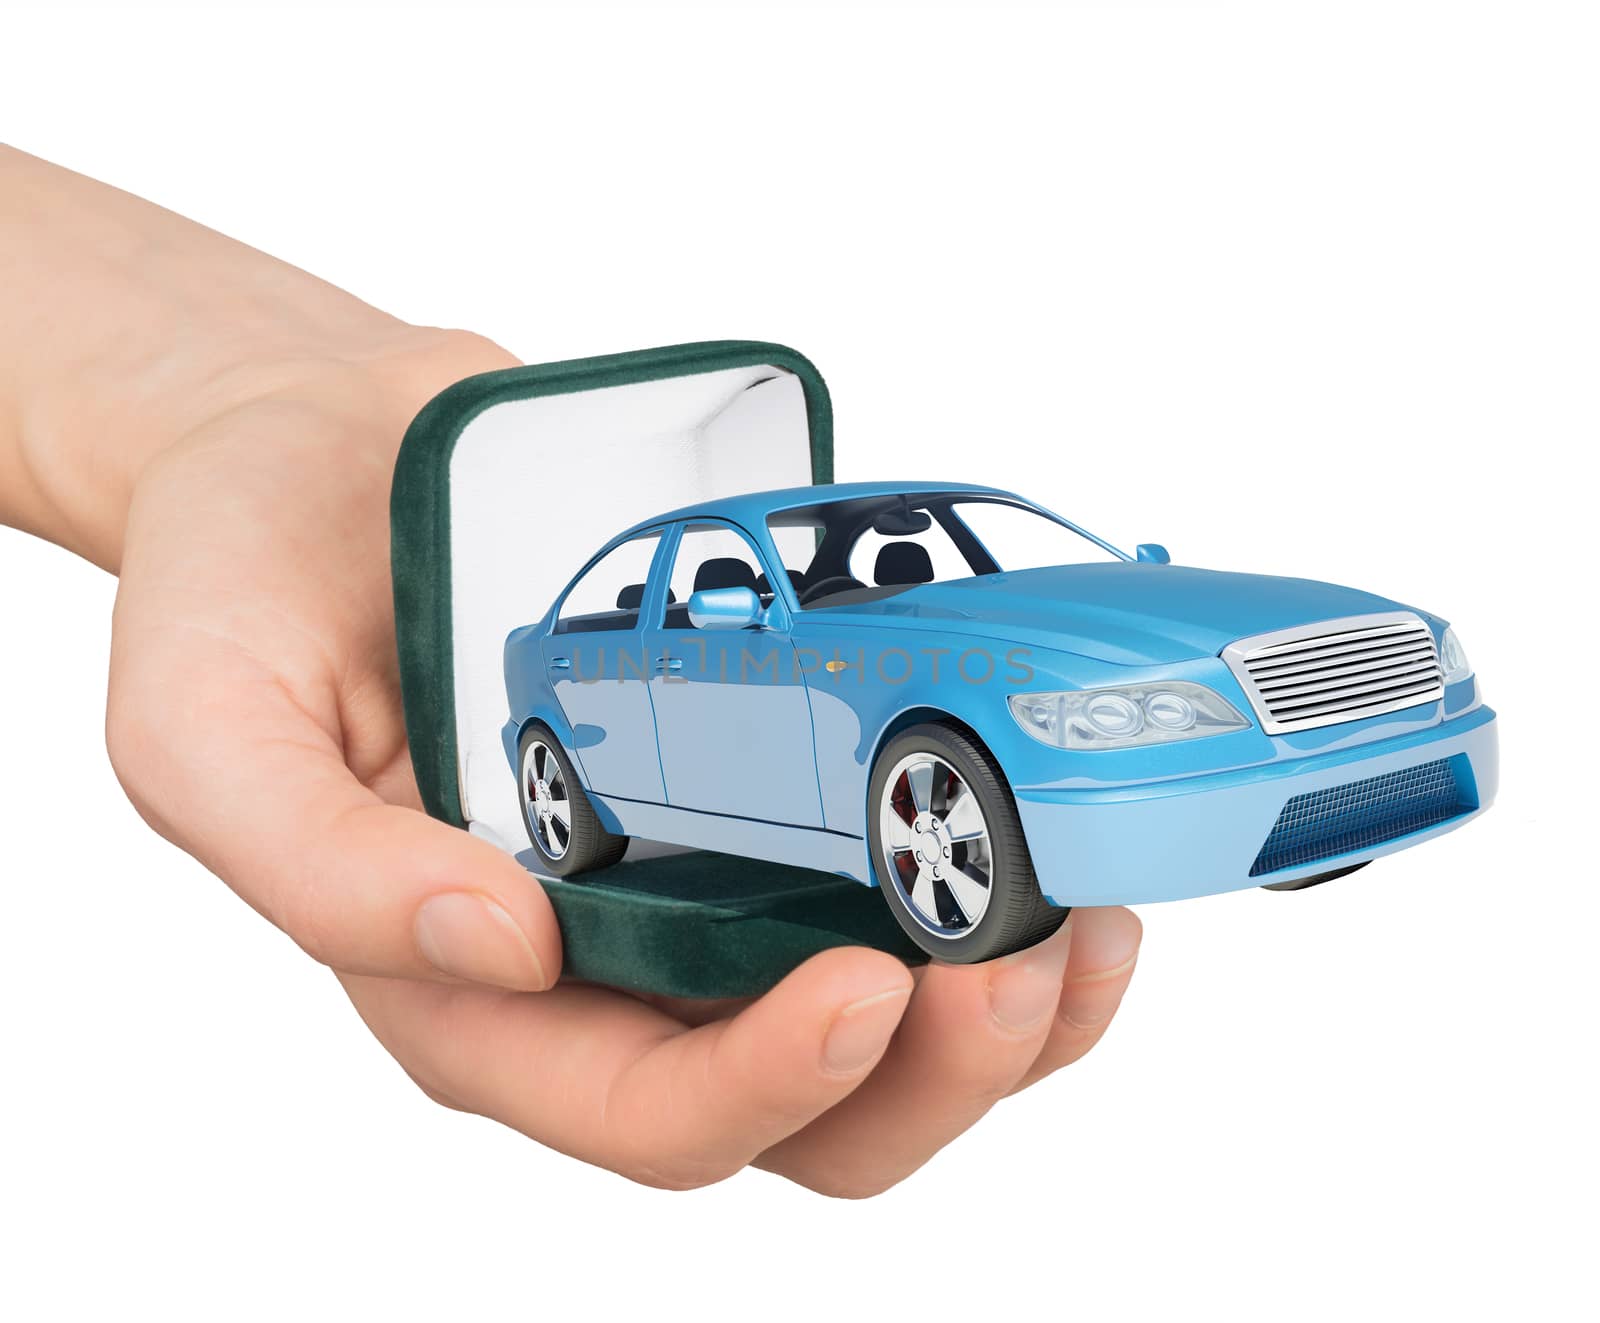 Empty ring box with car in humans hand on isolated white background